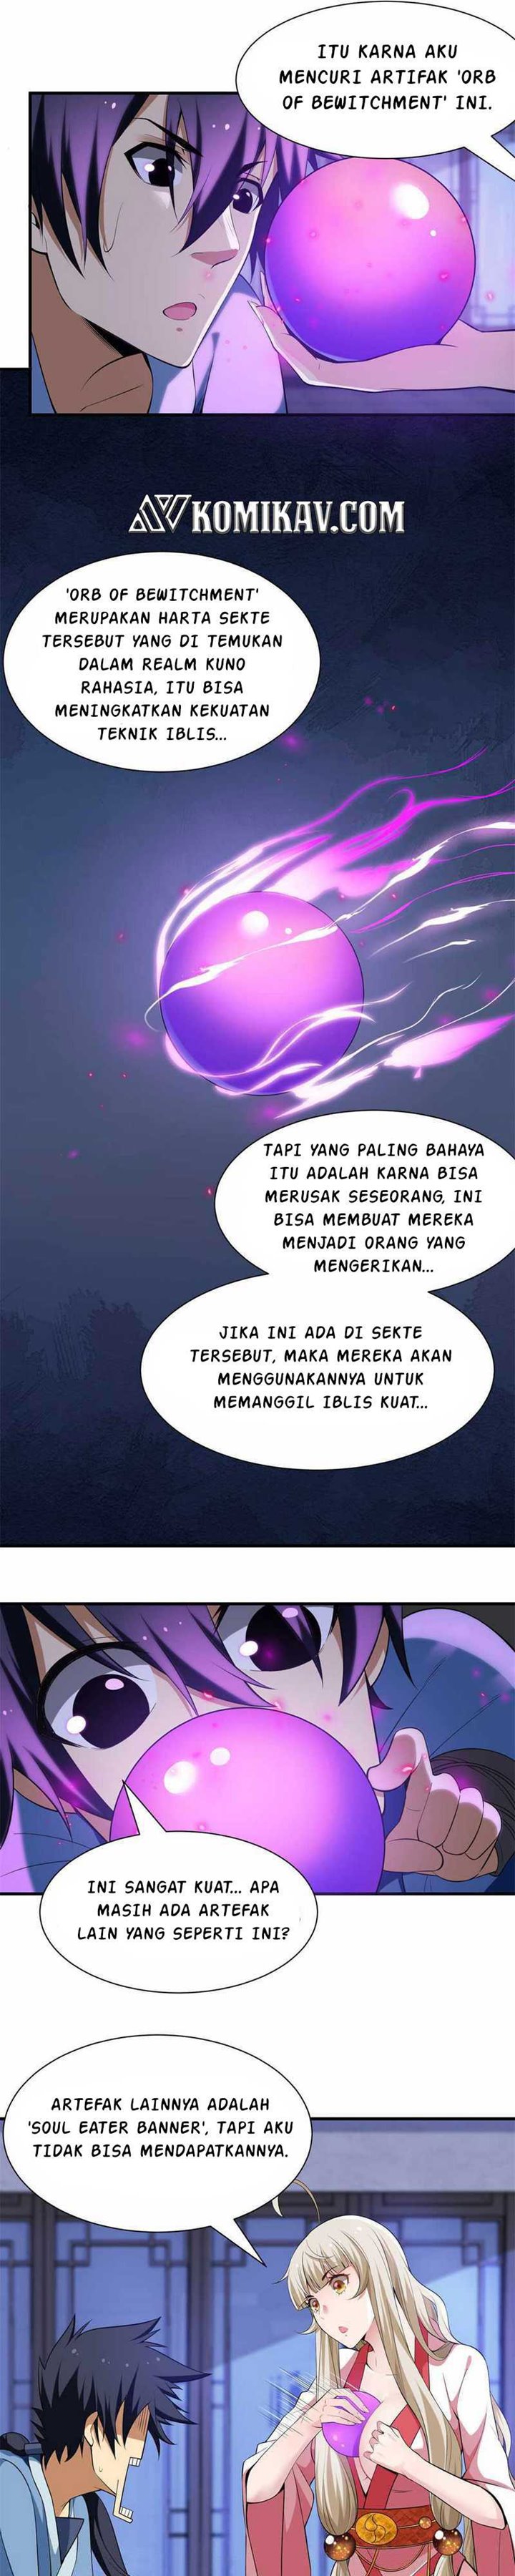 Dilarang COPAS - situs resmi www.mangacanblog.com - Komik i just want to be beaten to death by everyone 015 - chapter 15 16 Indonesia i just want to be beaten to death by everyone 015 - chapter 15 Terbaru 6|Baca Manga Komik Indonesia|Mangacan